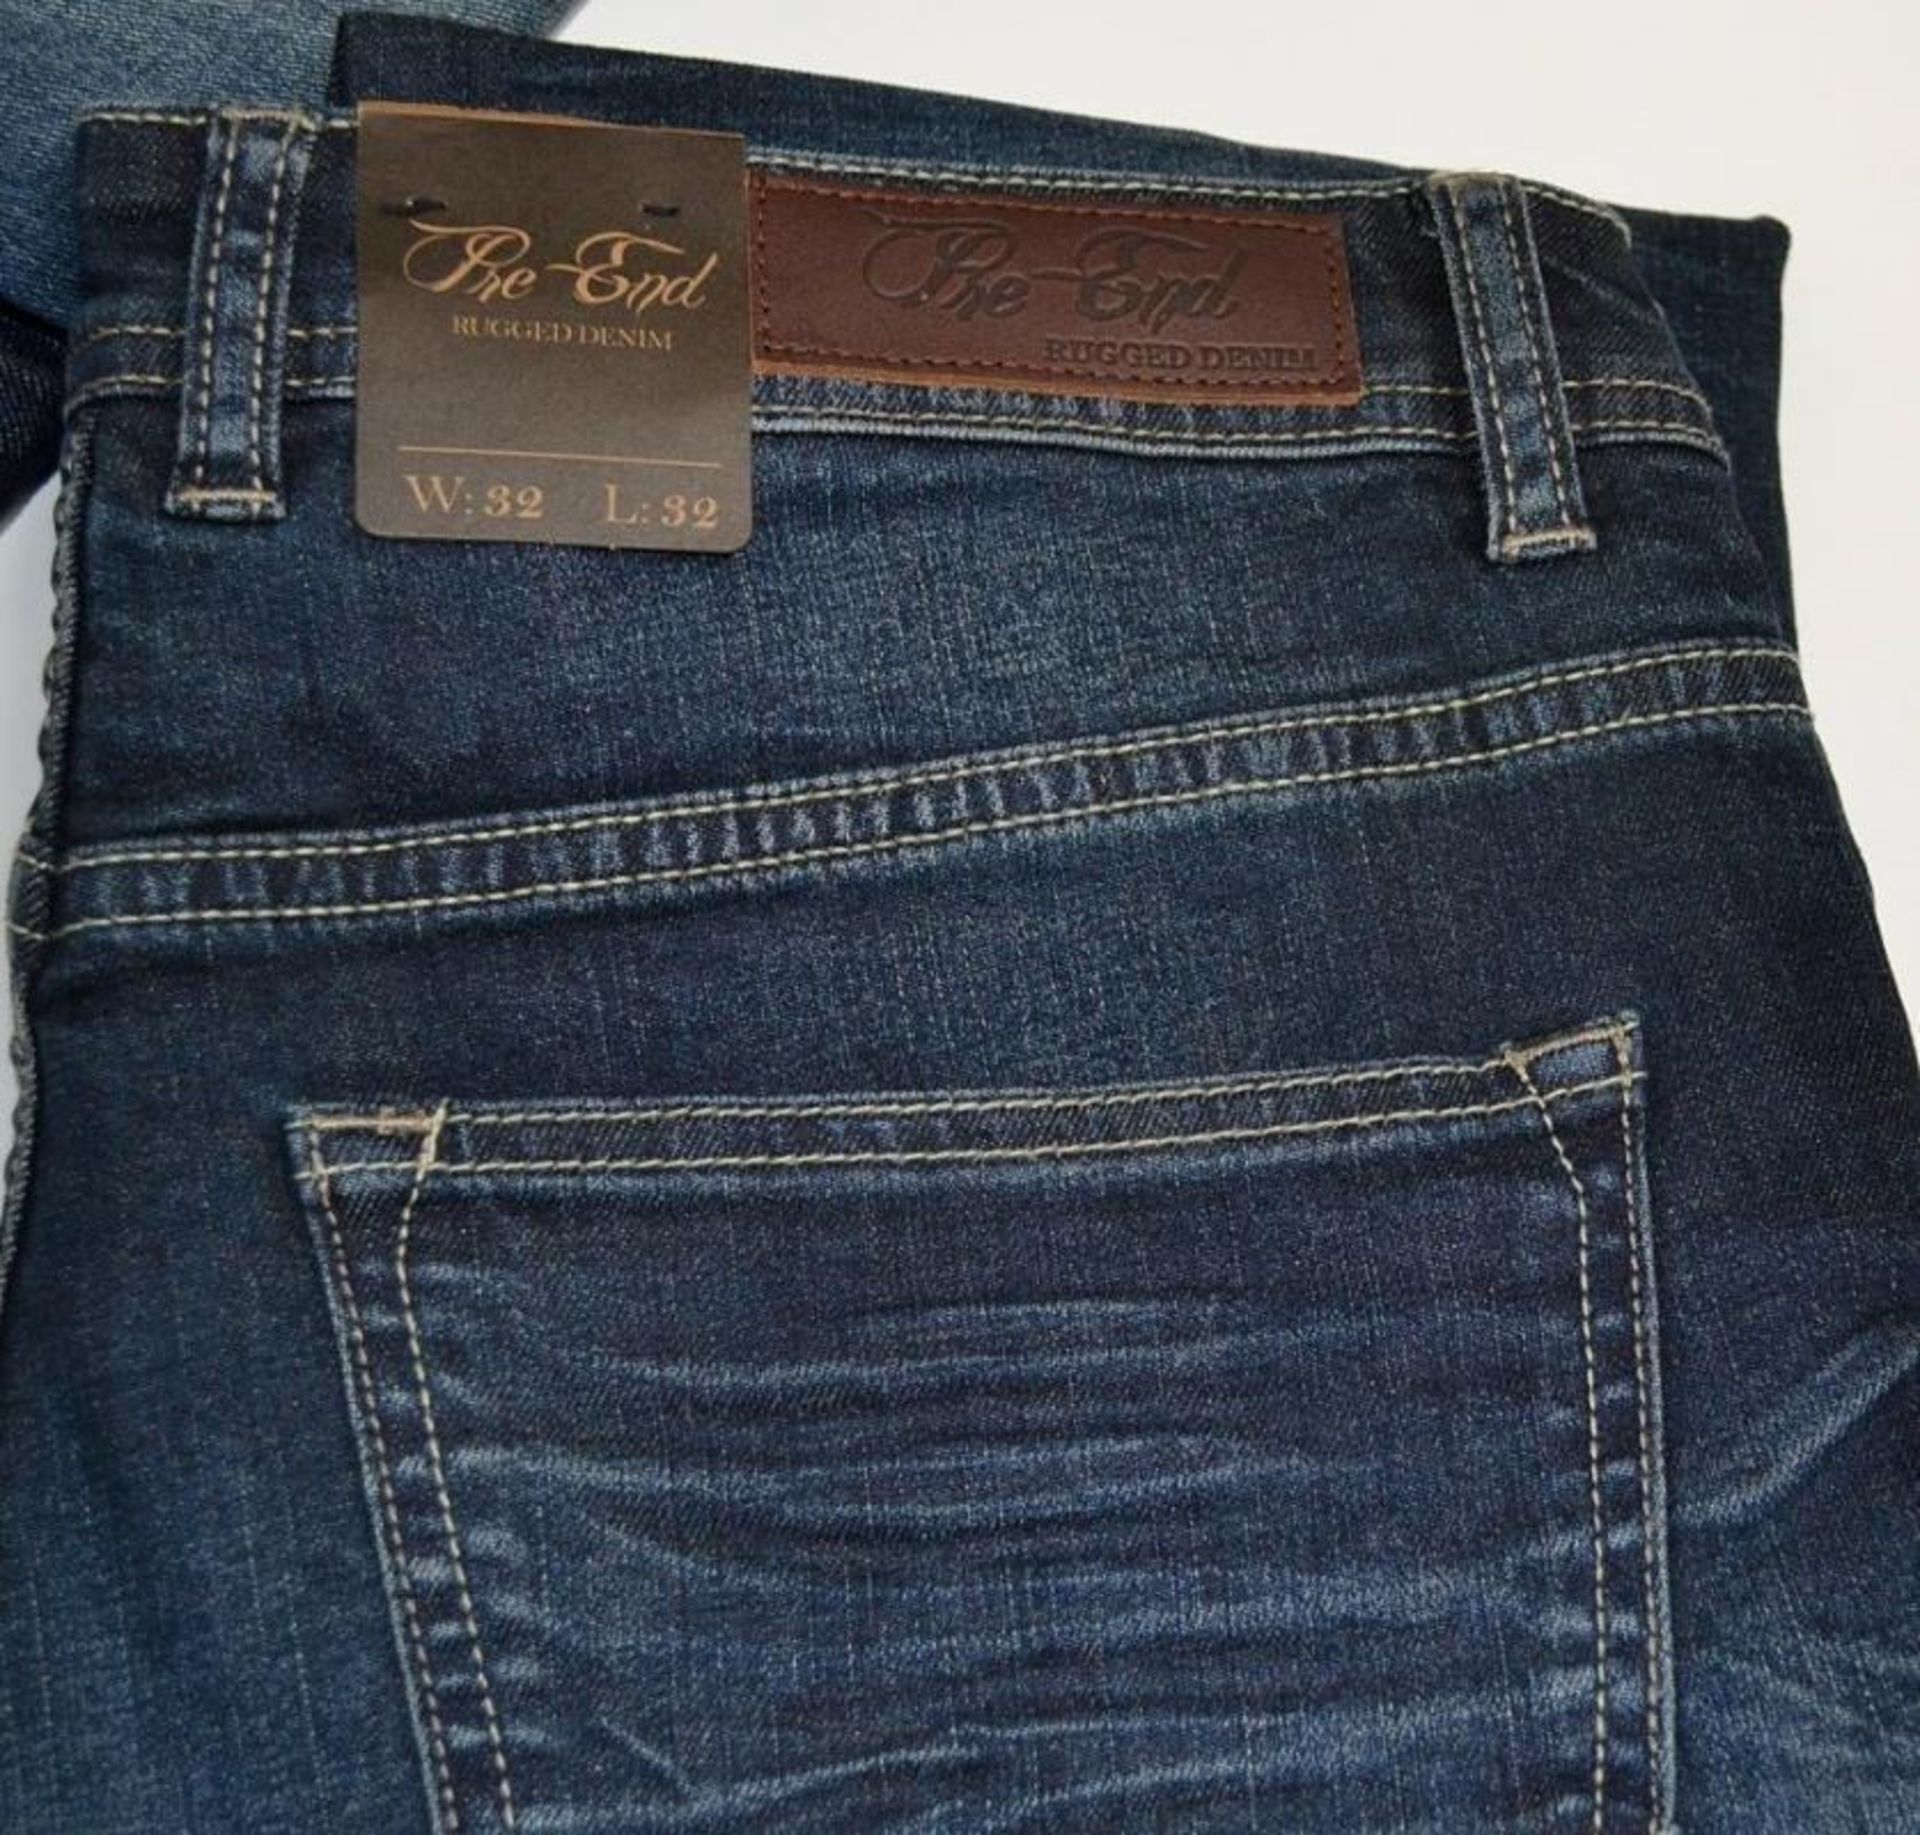 4 x Assorted Pairs Of PRE END Branded Mens Jeans - New Stock With Tags - Recent Retail Closure - - Image 2 of 5